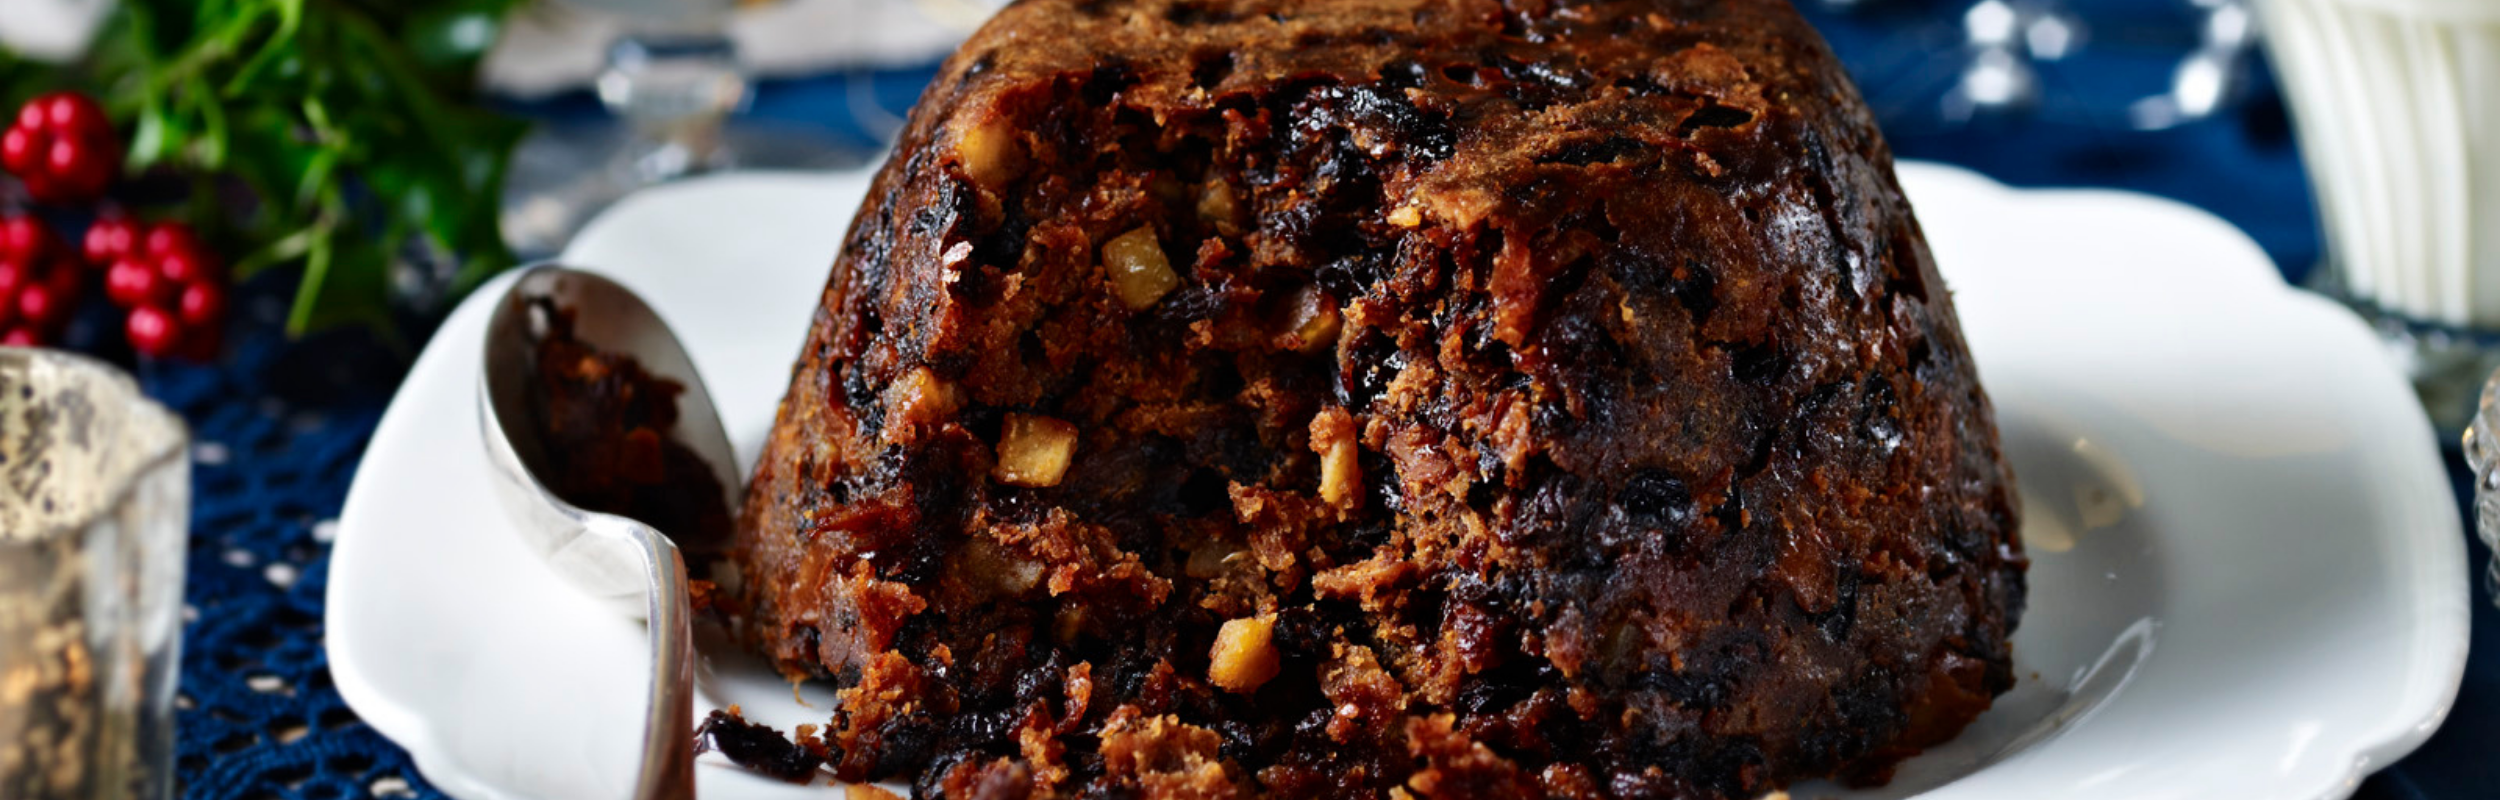 Your Christmas pudding does more than just taste good!